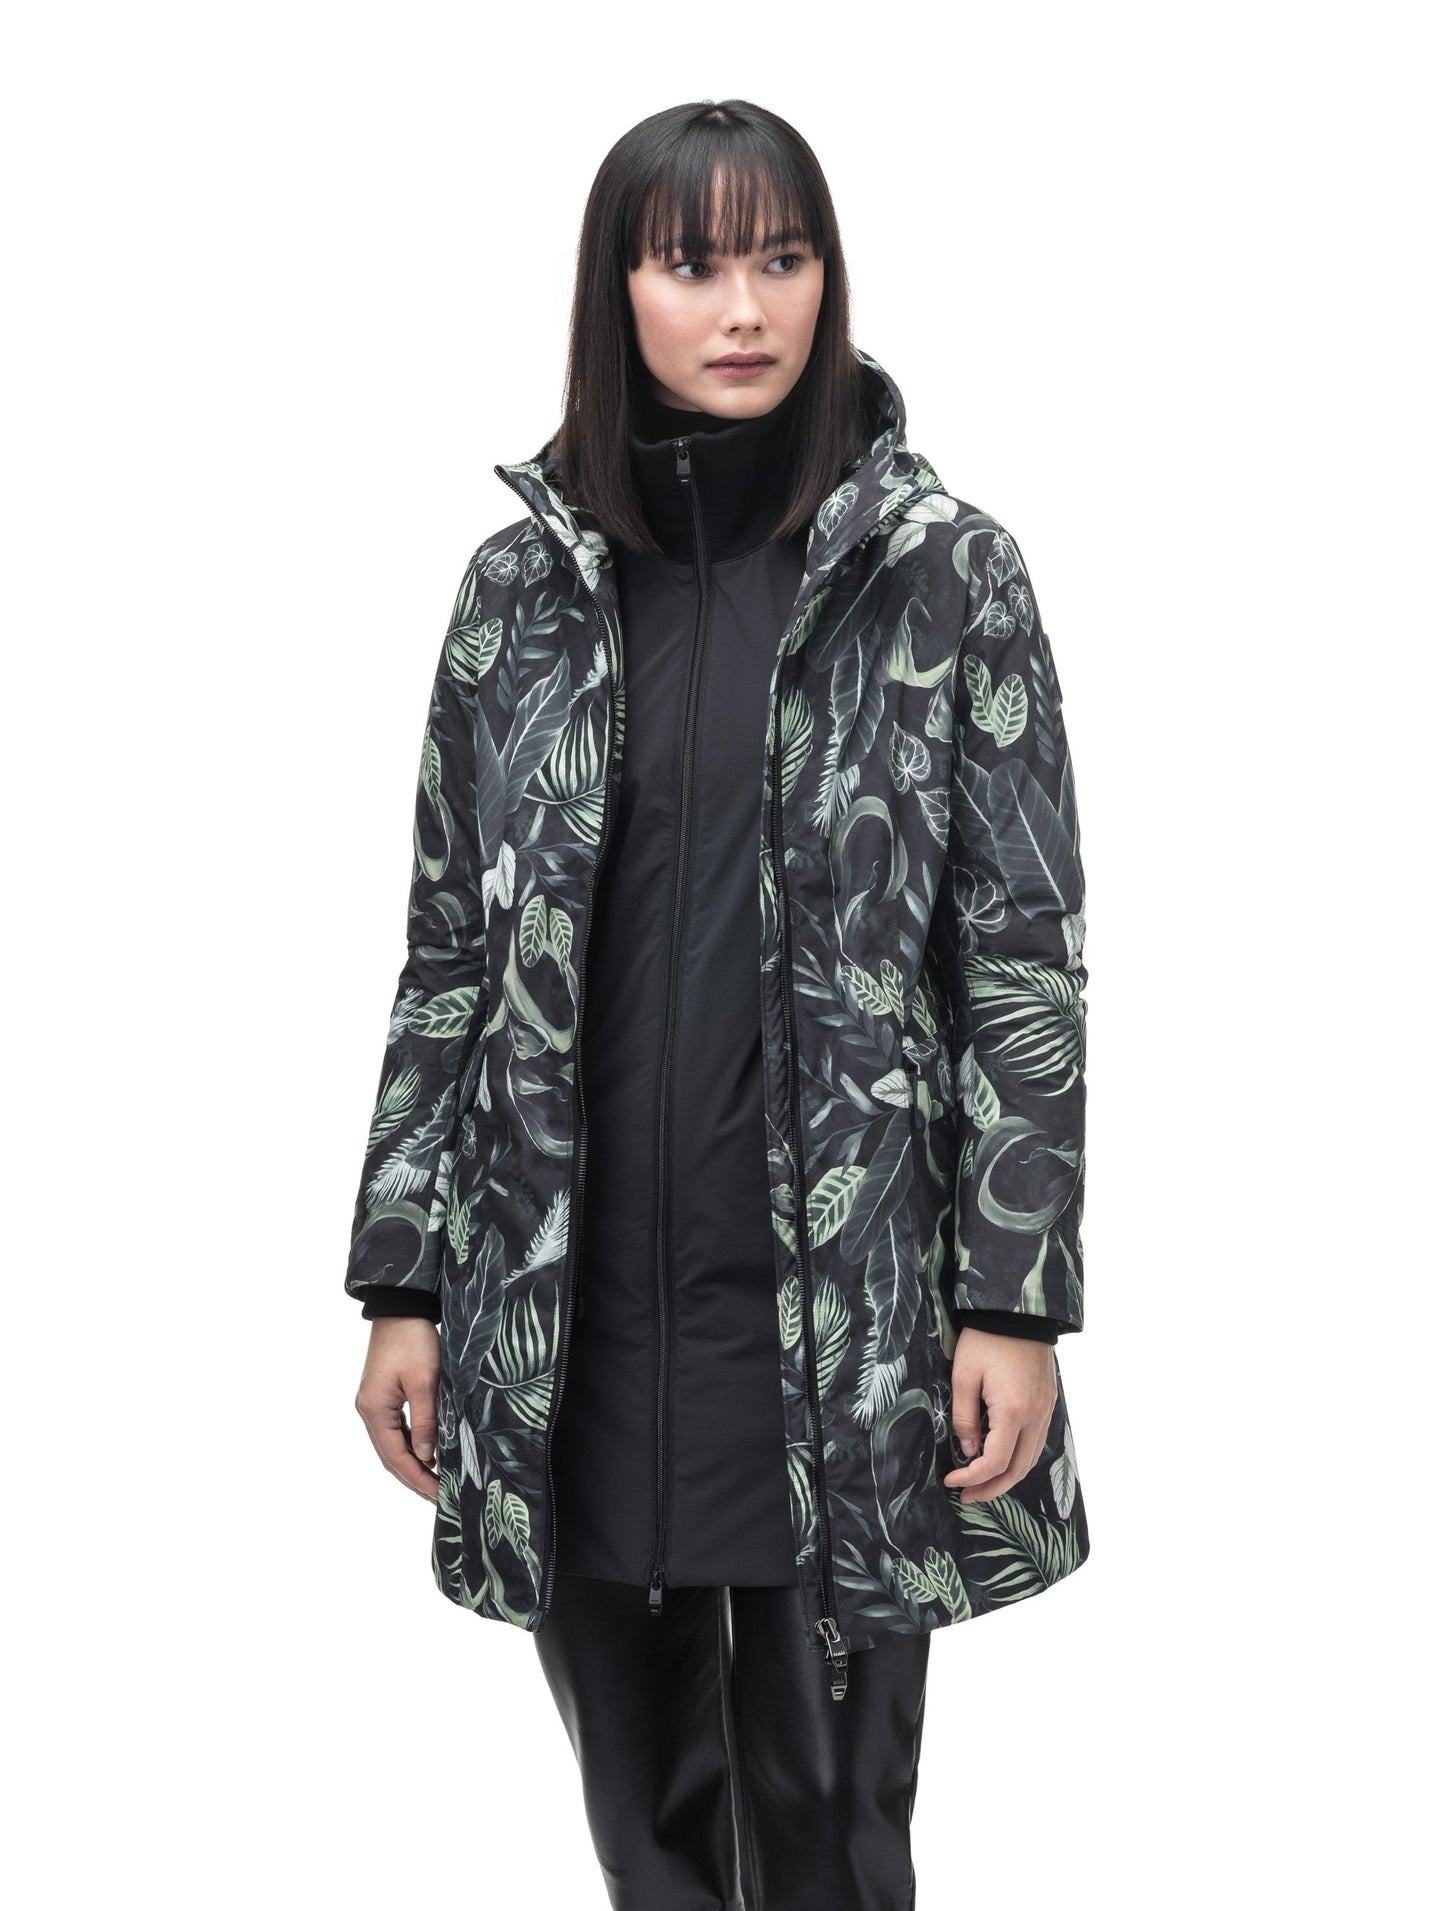 Romeda Furless Ladies Mid Thigh Parka in thigh length, Canadian duck down insulation, non-removable hood, and two-way front zipper, in Foliage